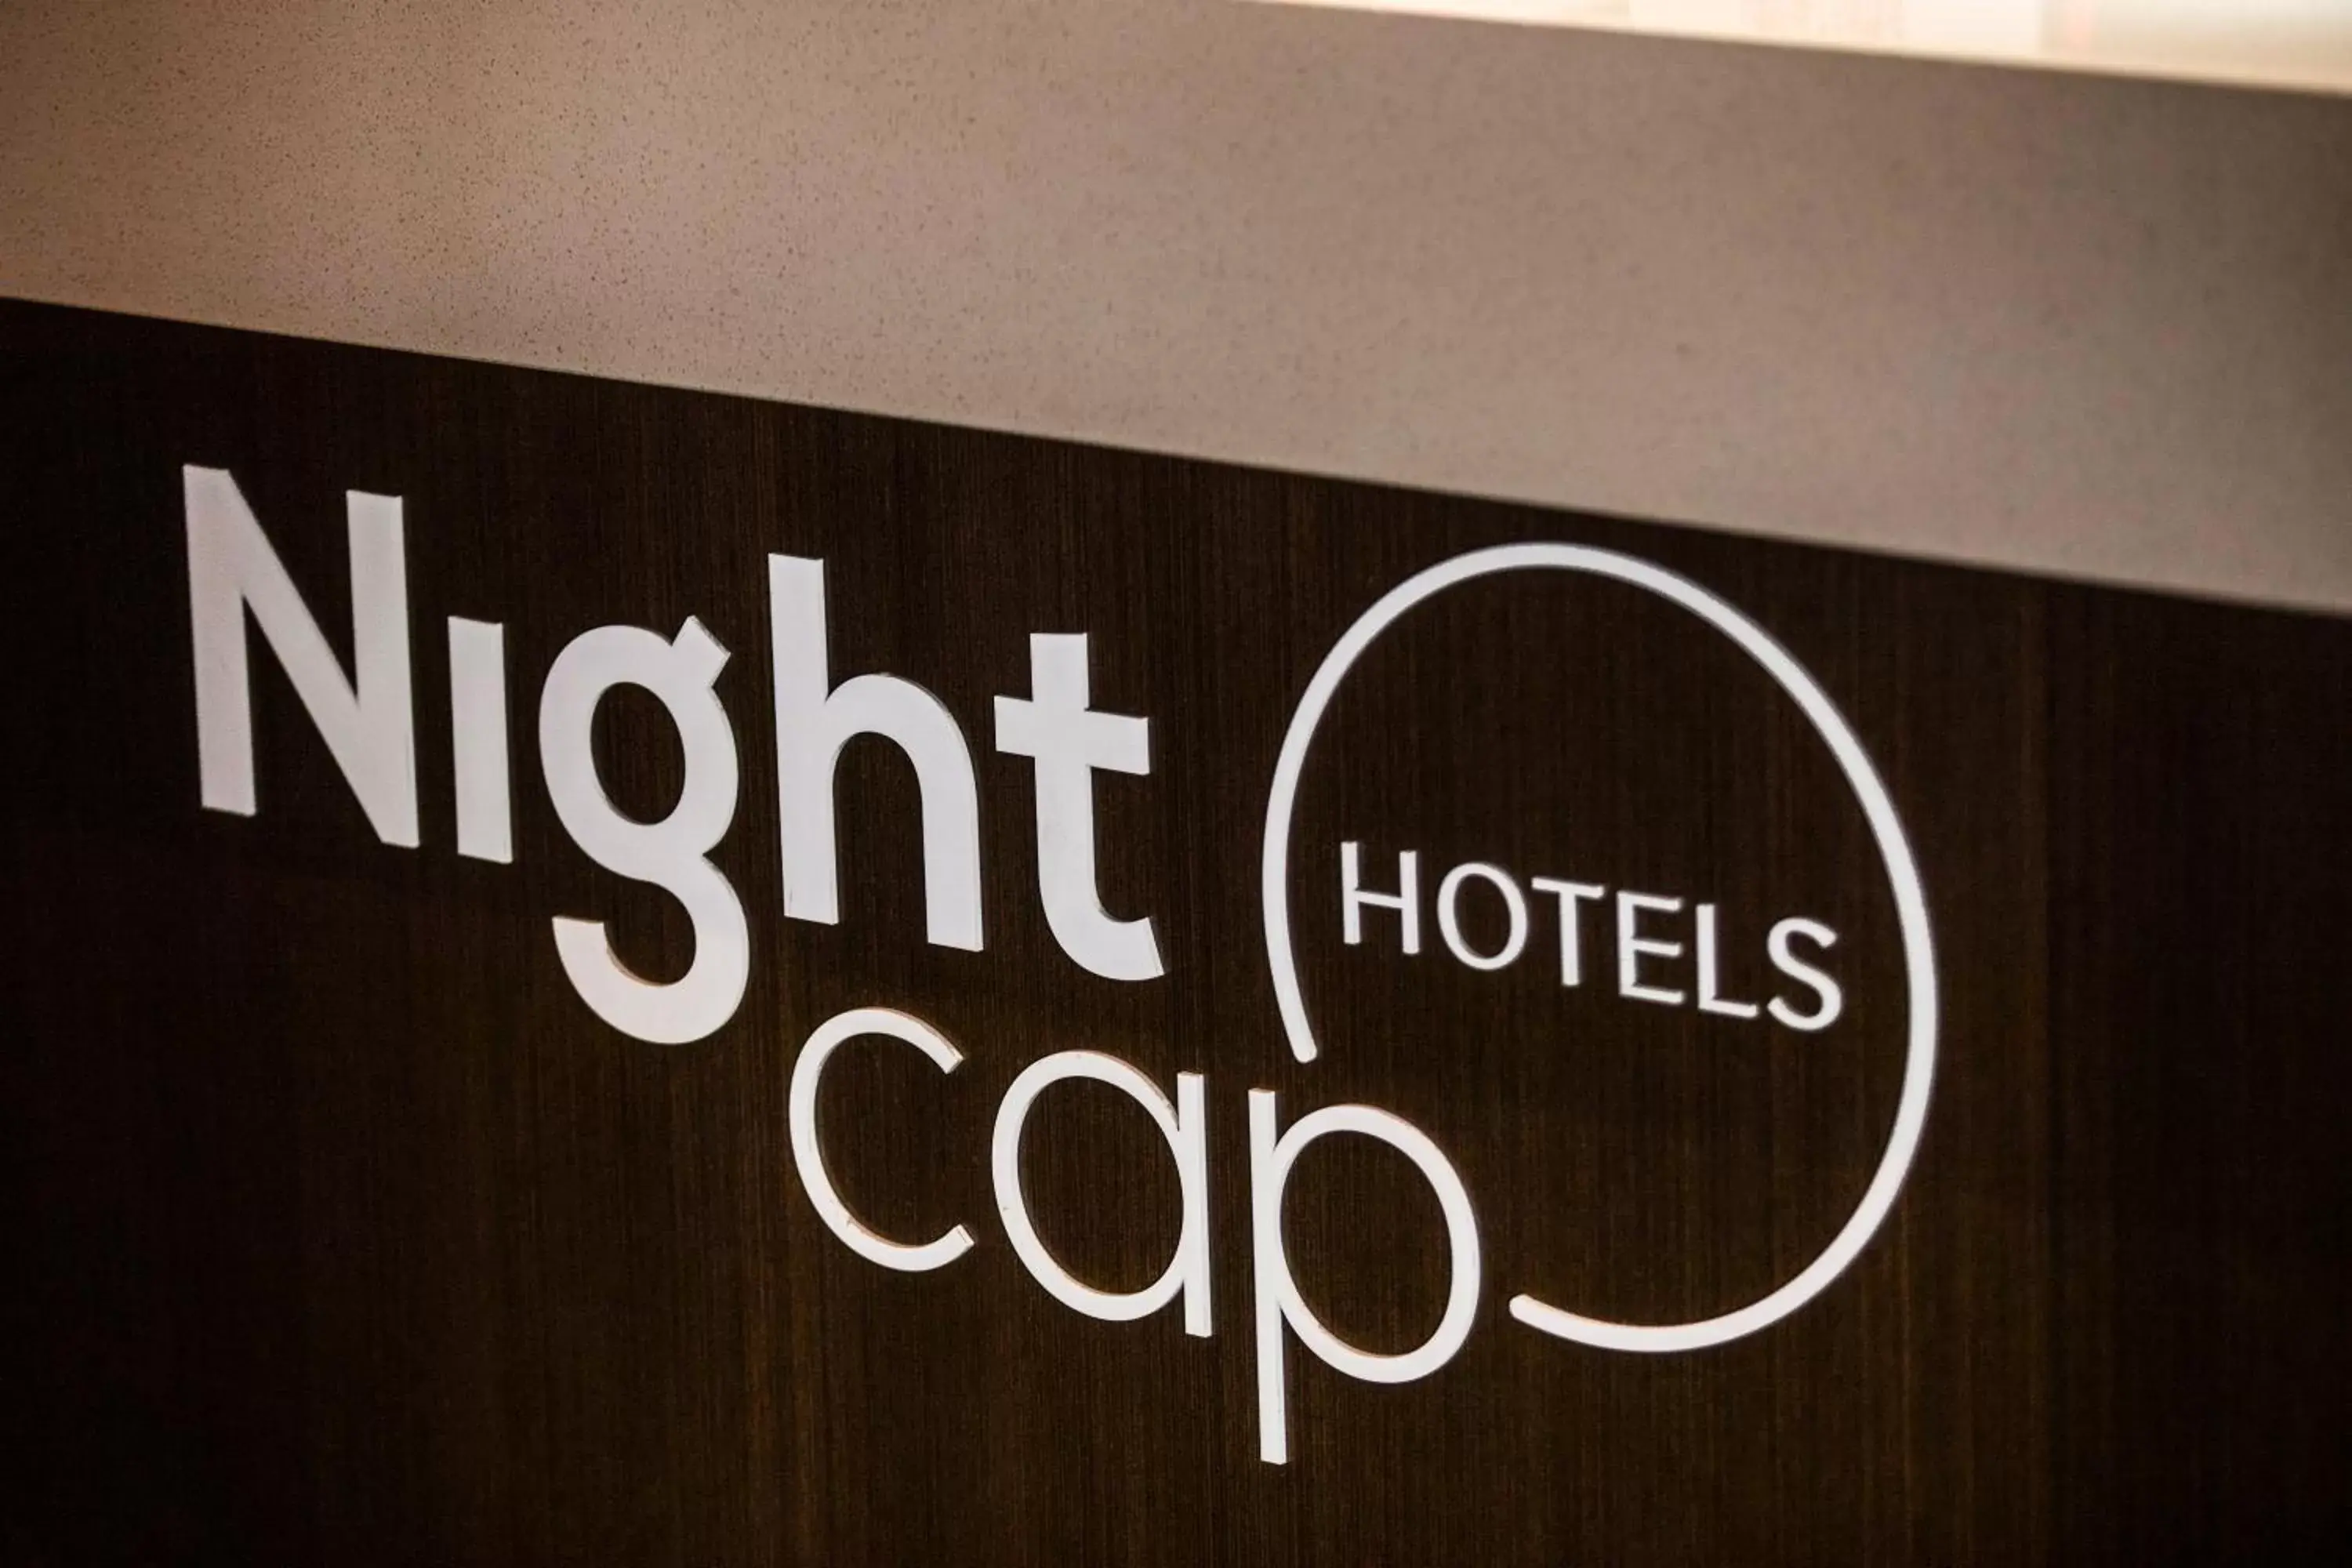 Property logo or sign in Nightcap at Ashley Hotel